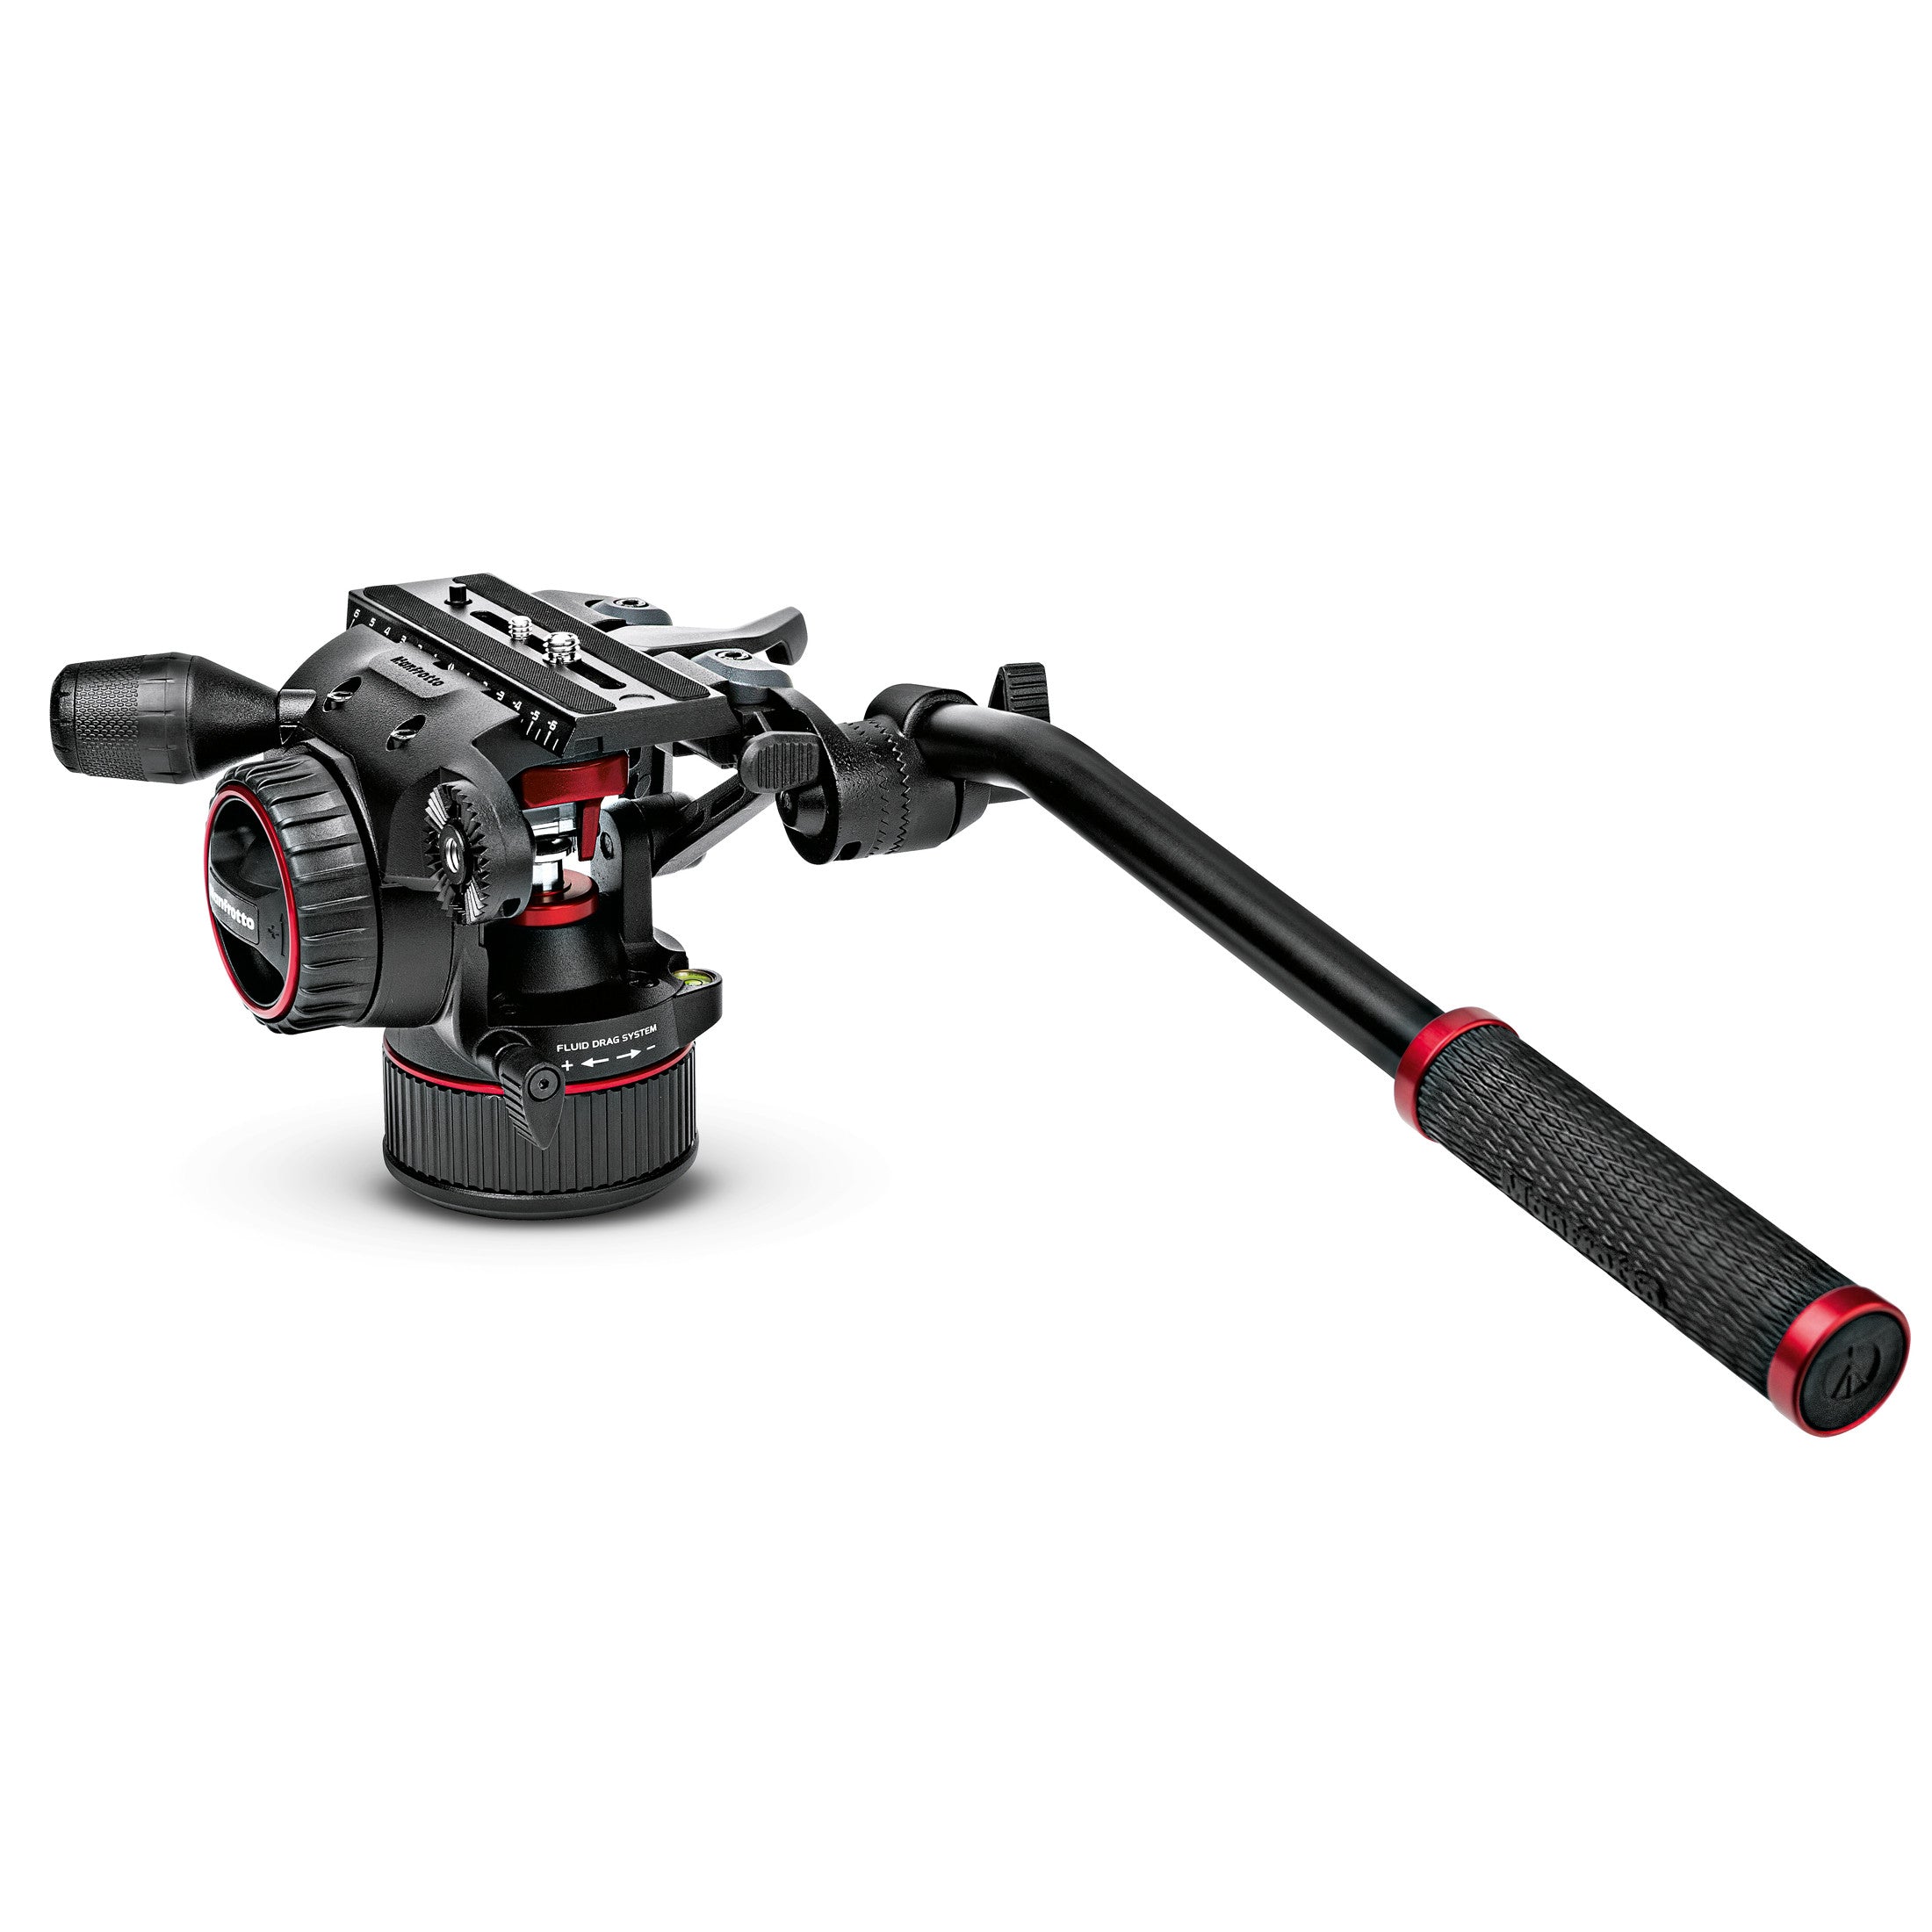 Manfrotto MVKN8TWINMUS Video Kit with Nitrotech N8 Head & 546B Twin Leg with Mid-Level Spreader Tripod